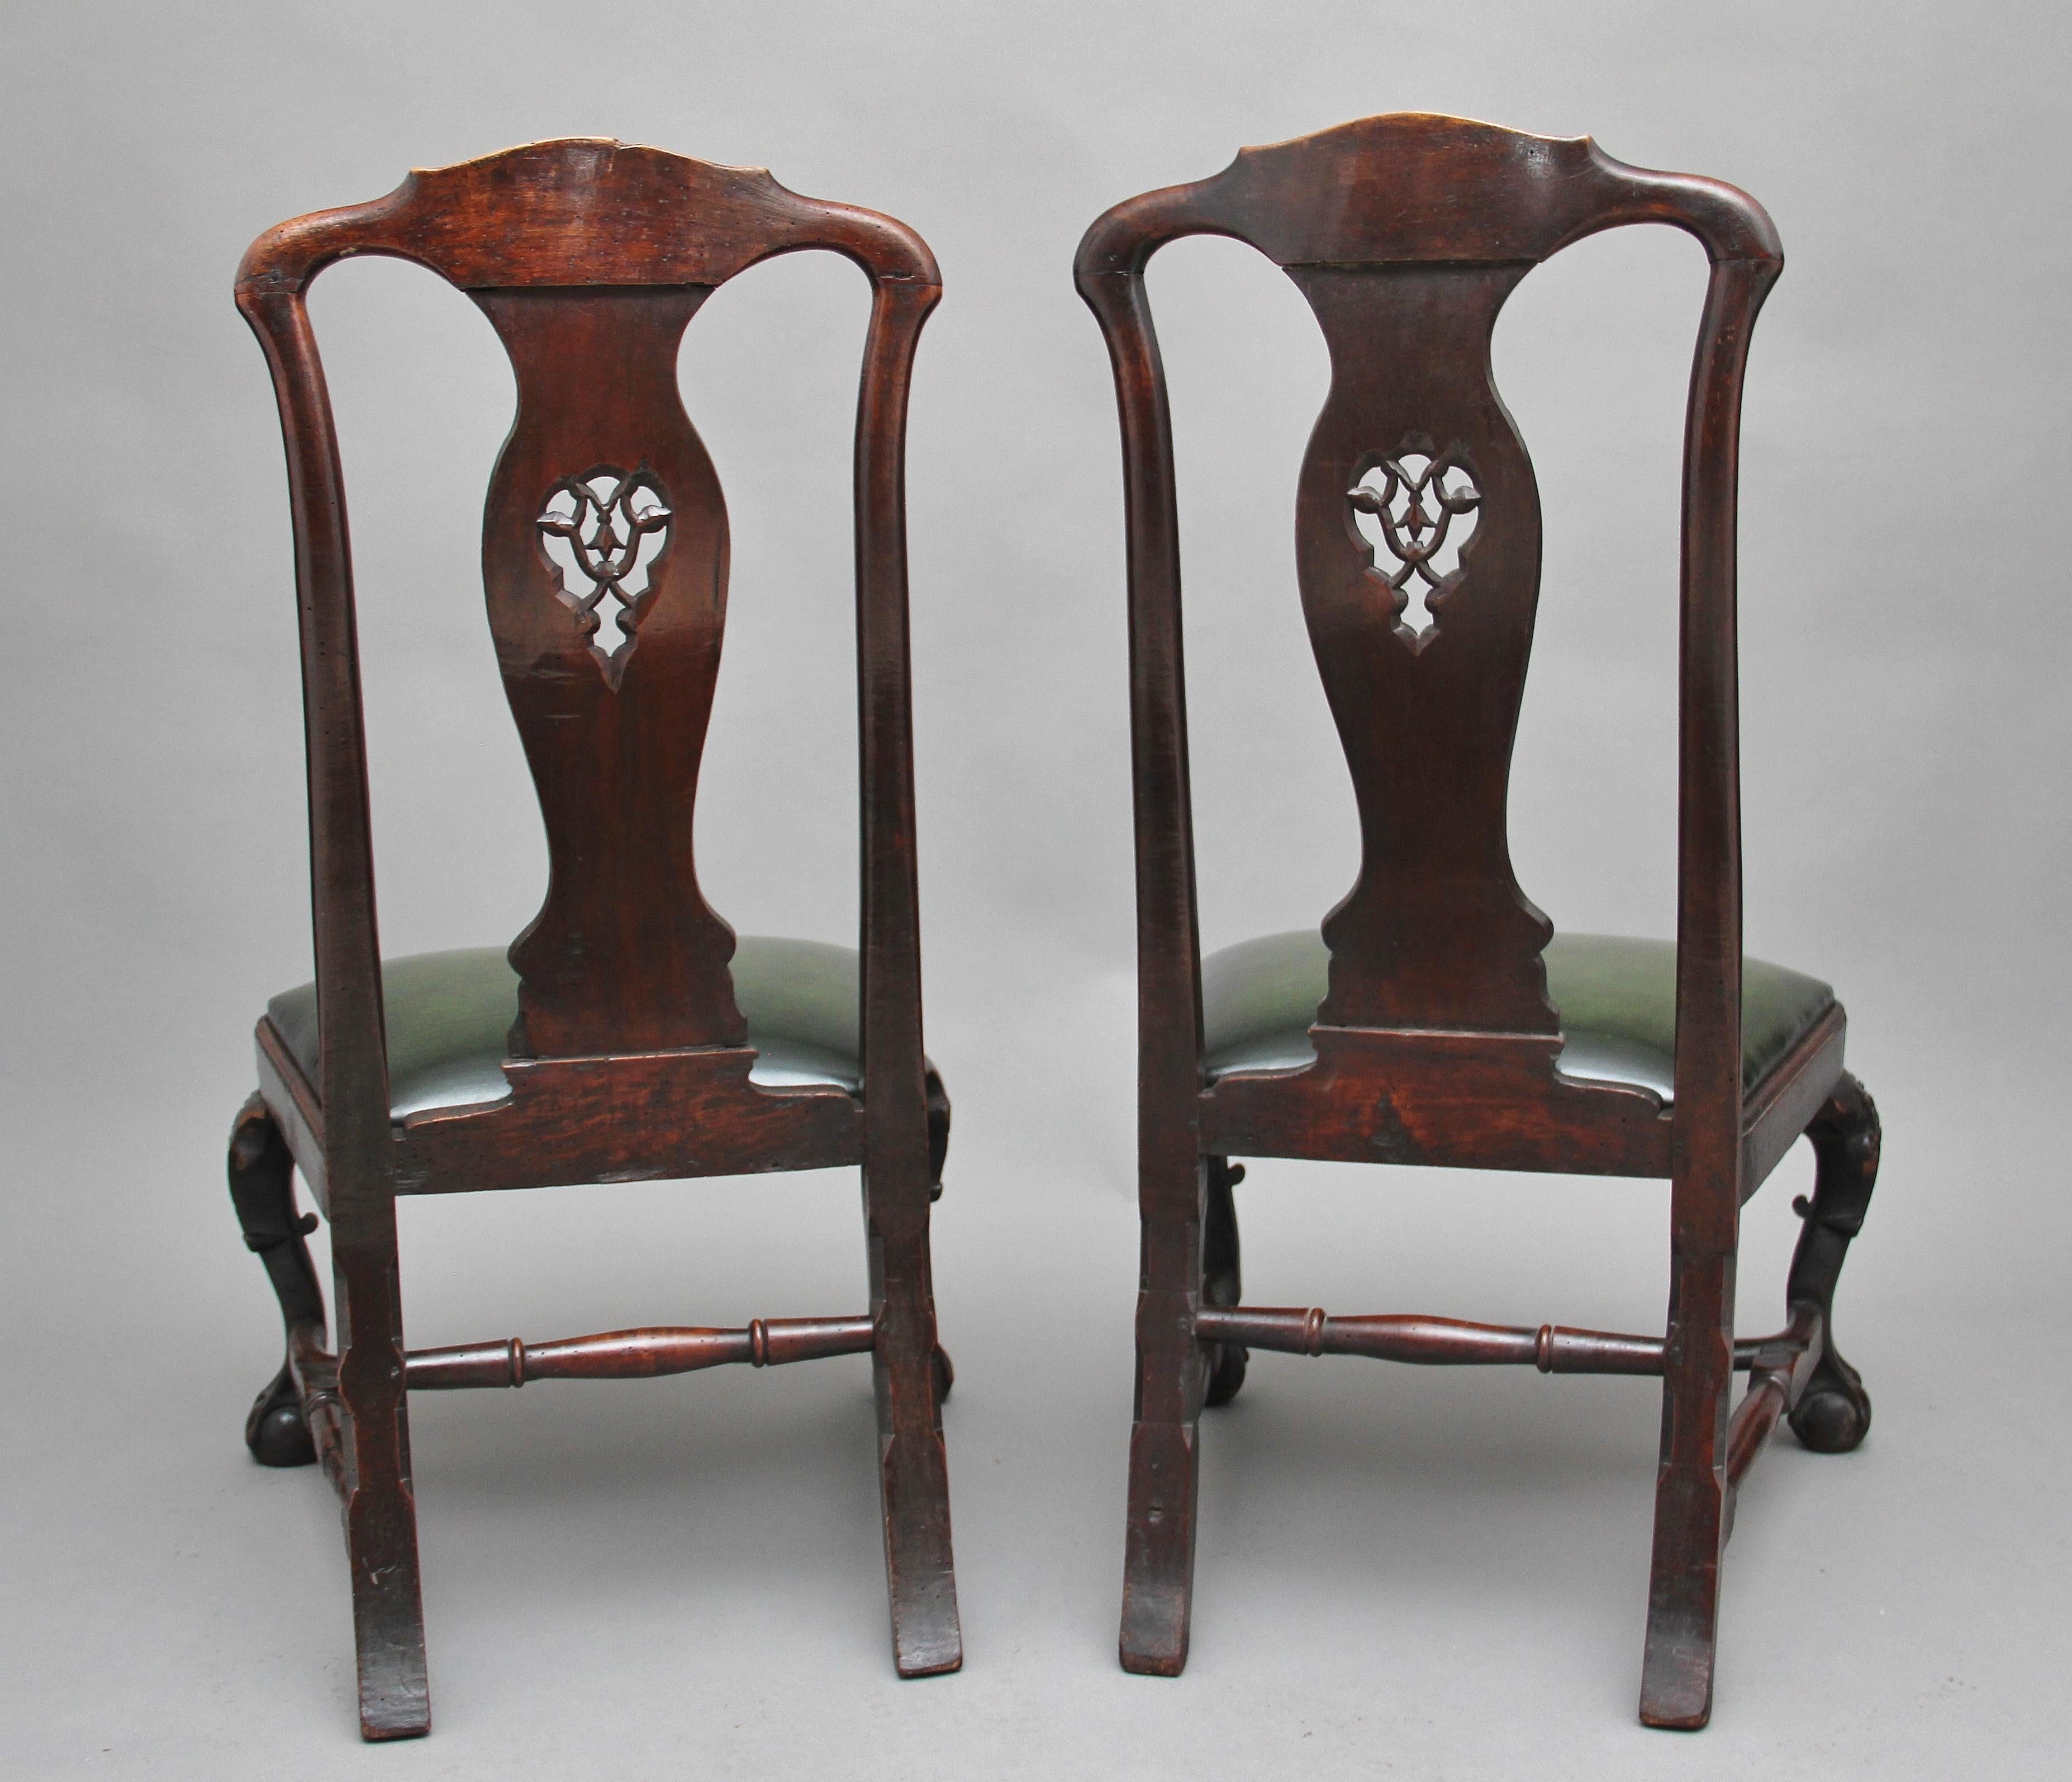 18th century chairs for sale